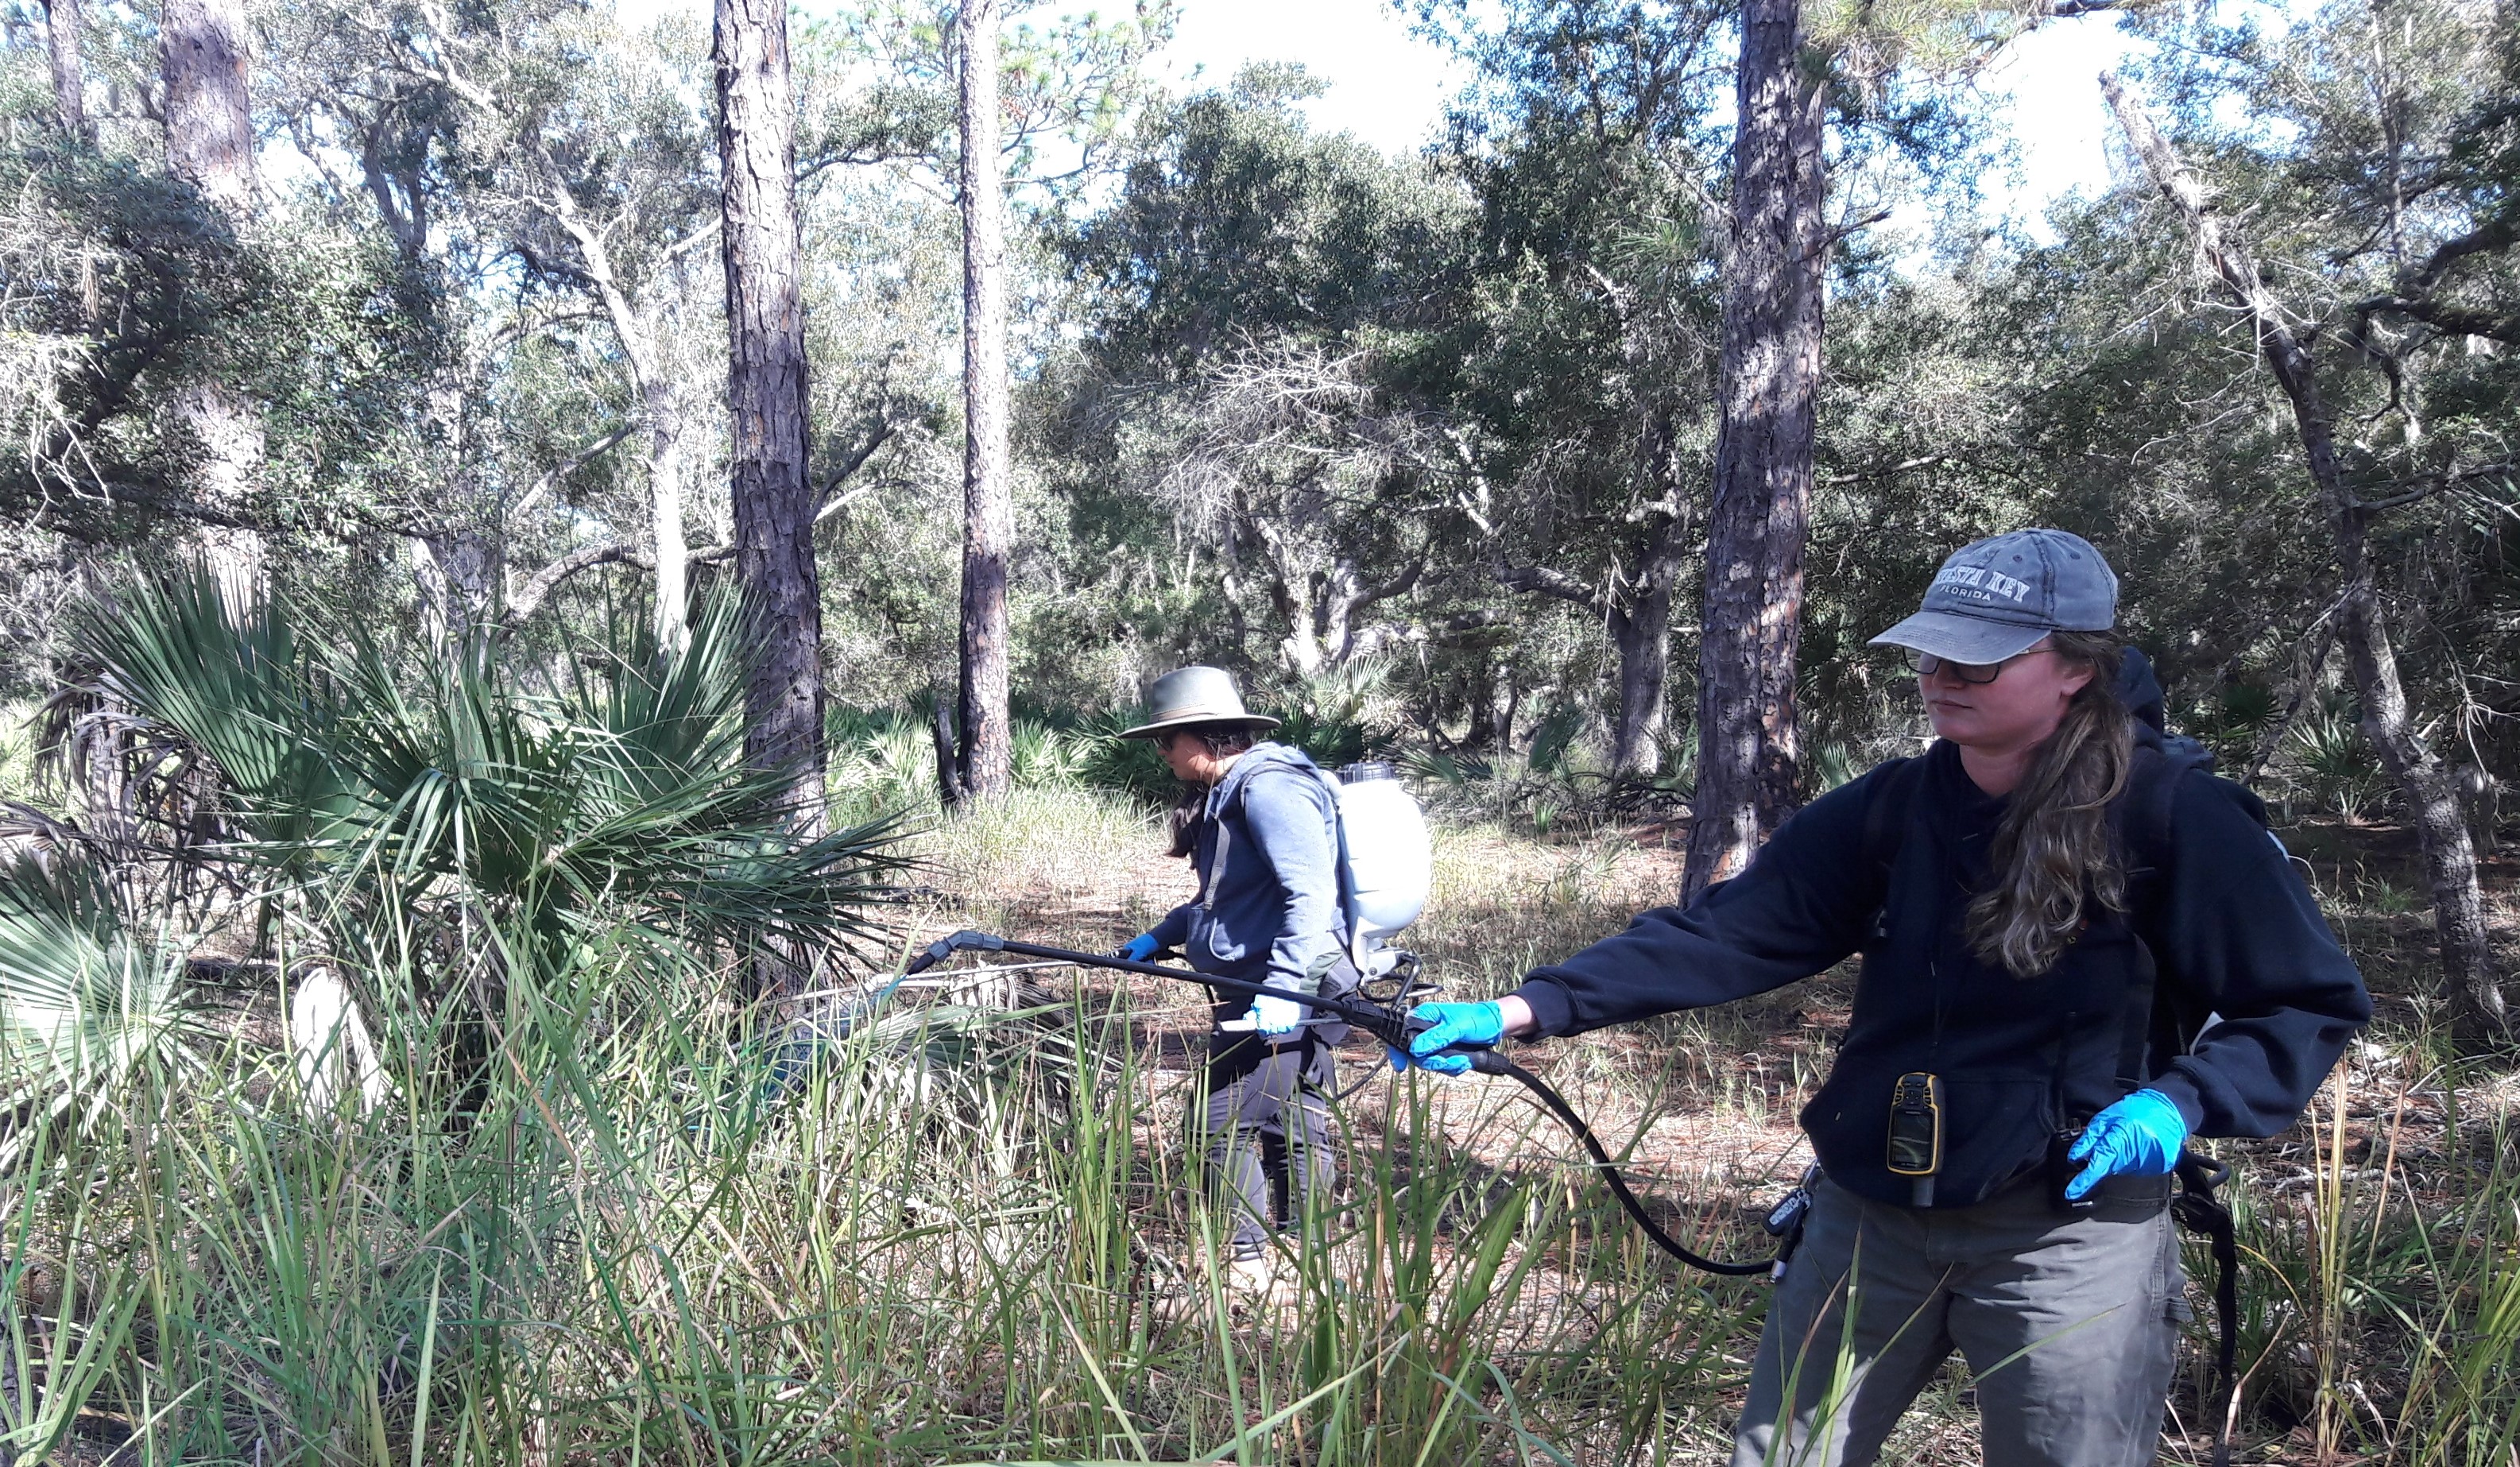 Diana Wahner (AmeriCorps member) and Anne Reynolds (OPS exotic technician) apply herbicide to eradicate some cogongrass.